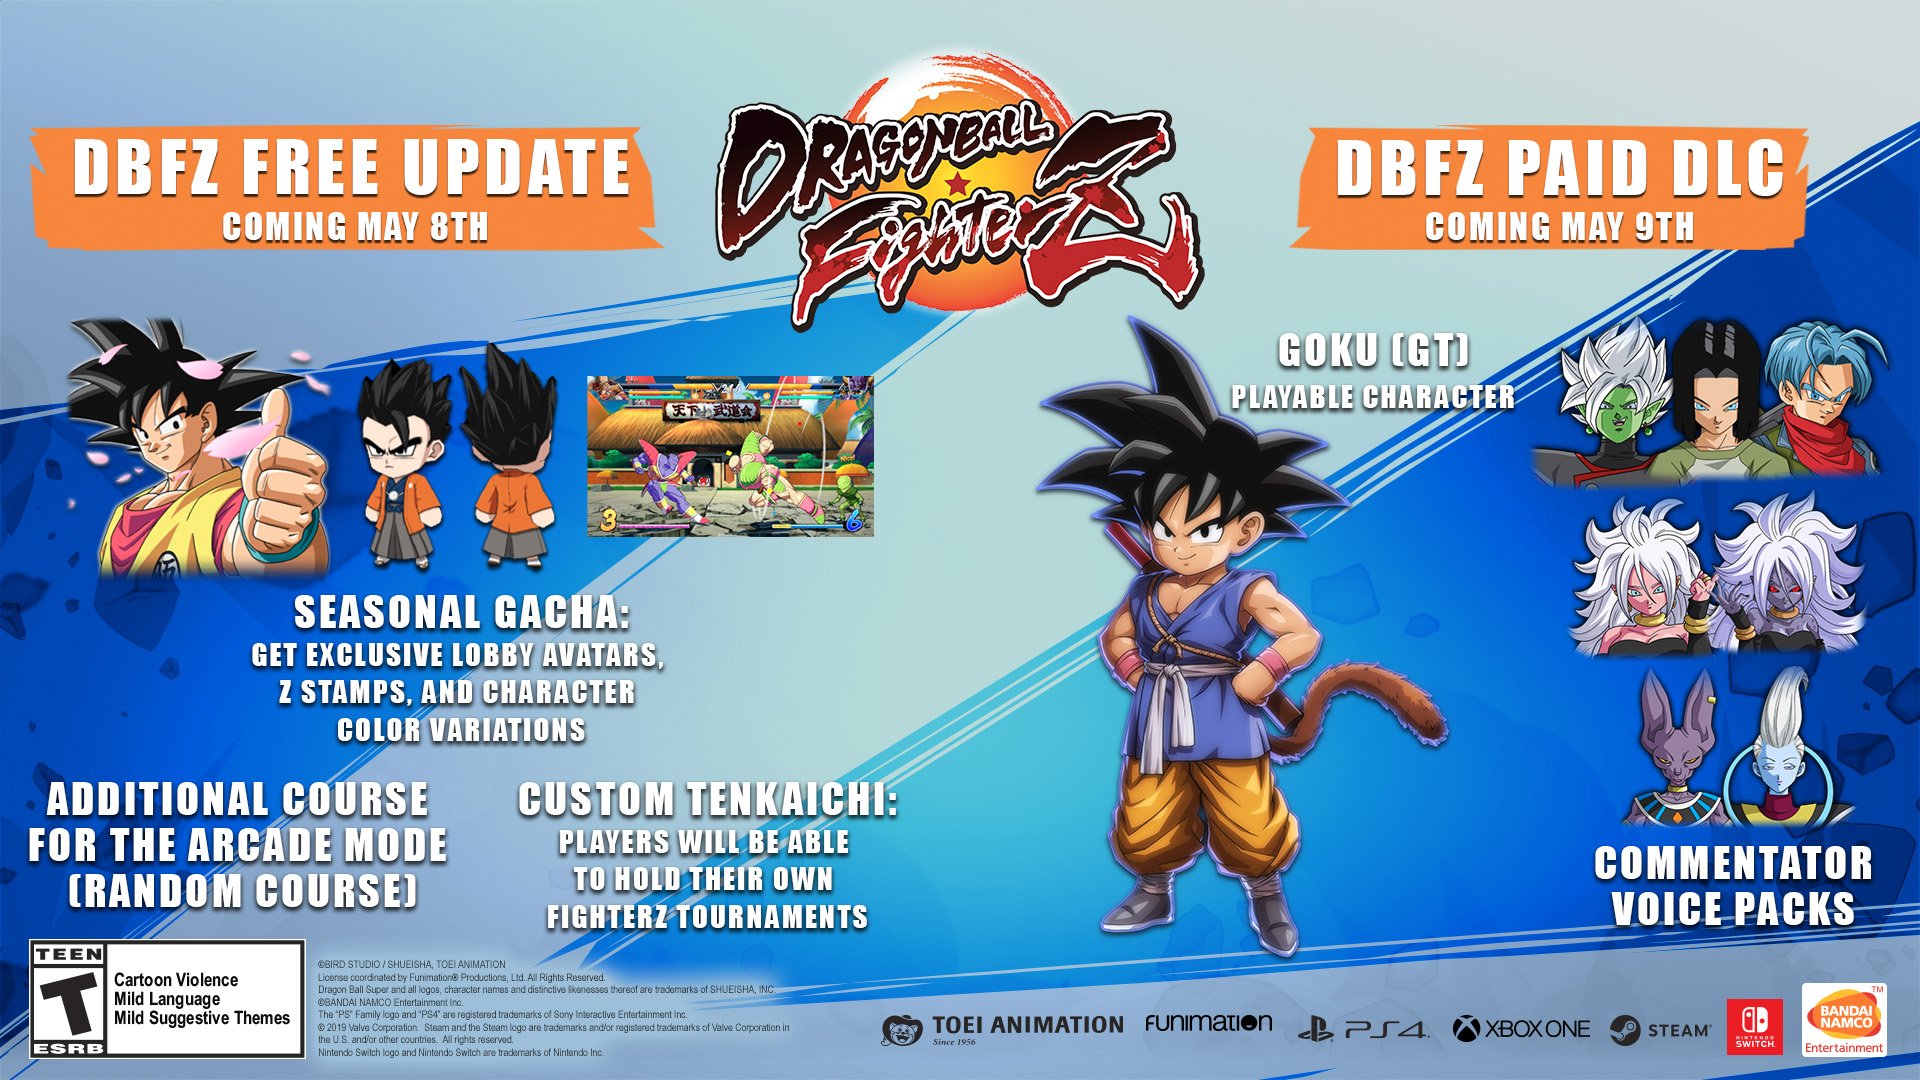 Bandai Namco Us Ar Twitter Unlock Seasonal Gacha A New Course For The Arcade Mode And Custom Tenkaichi With Our Dragonballfighterz Free Update Plus Get Ready For The Release Of Goku Gt